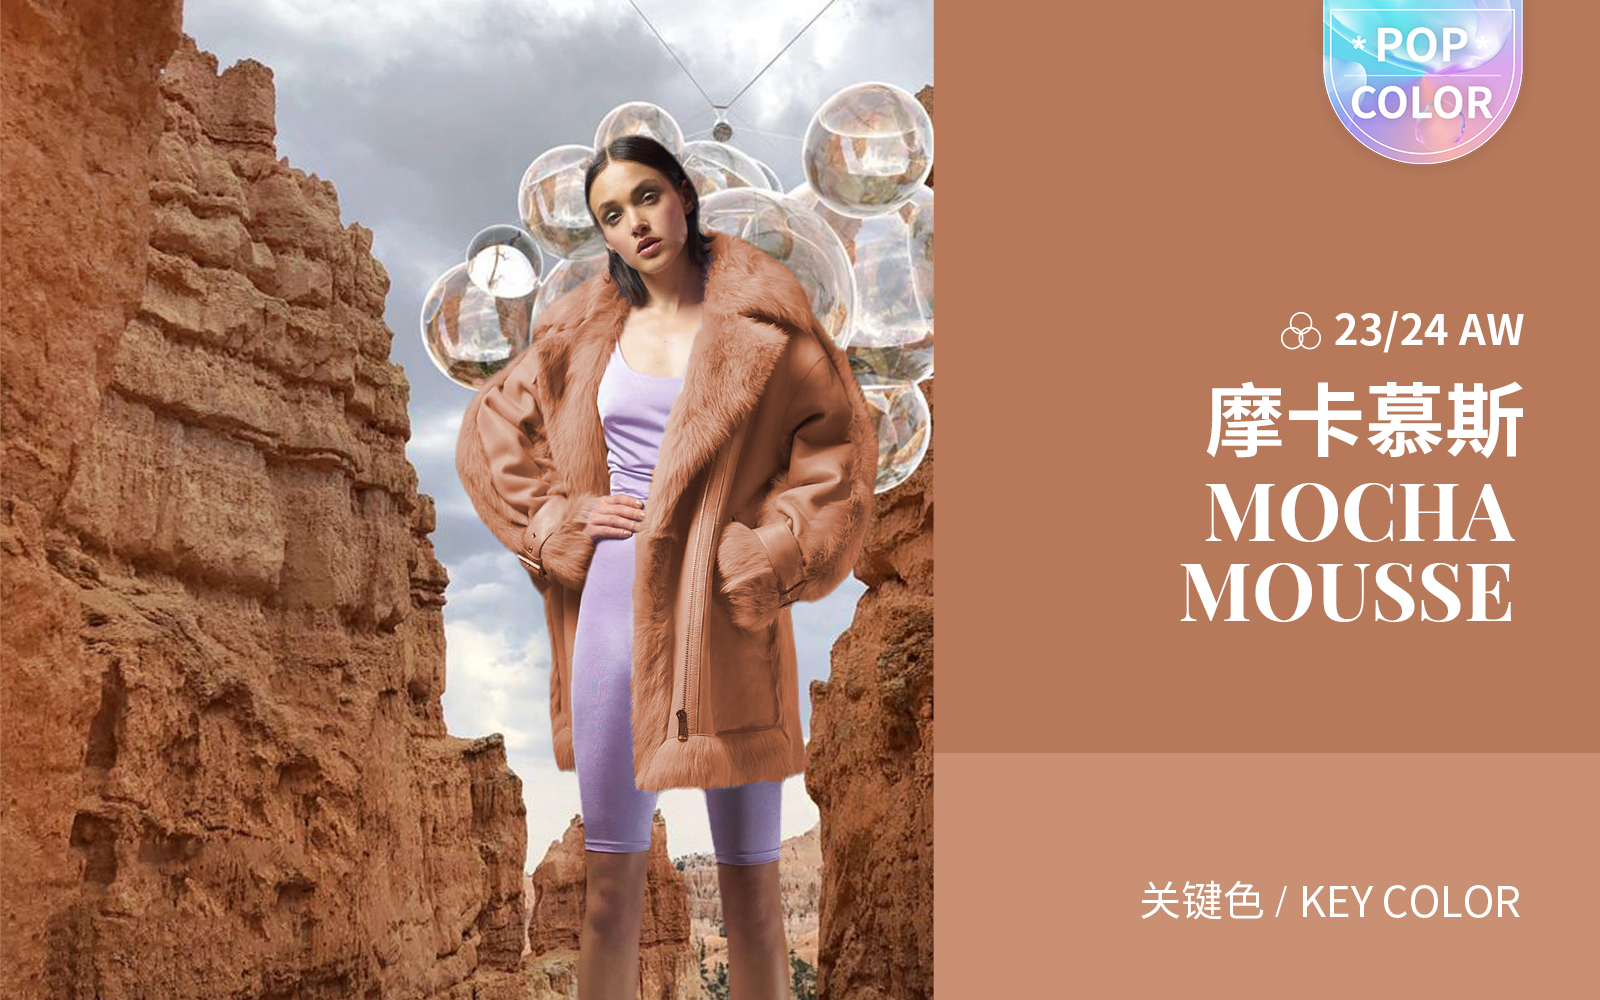 Mocha Mousse -- The Color Trend for Women's Leather & Fur